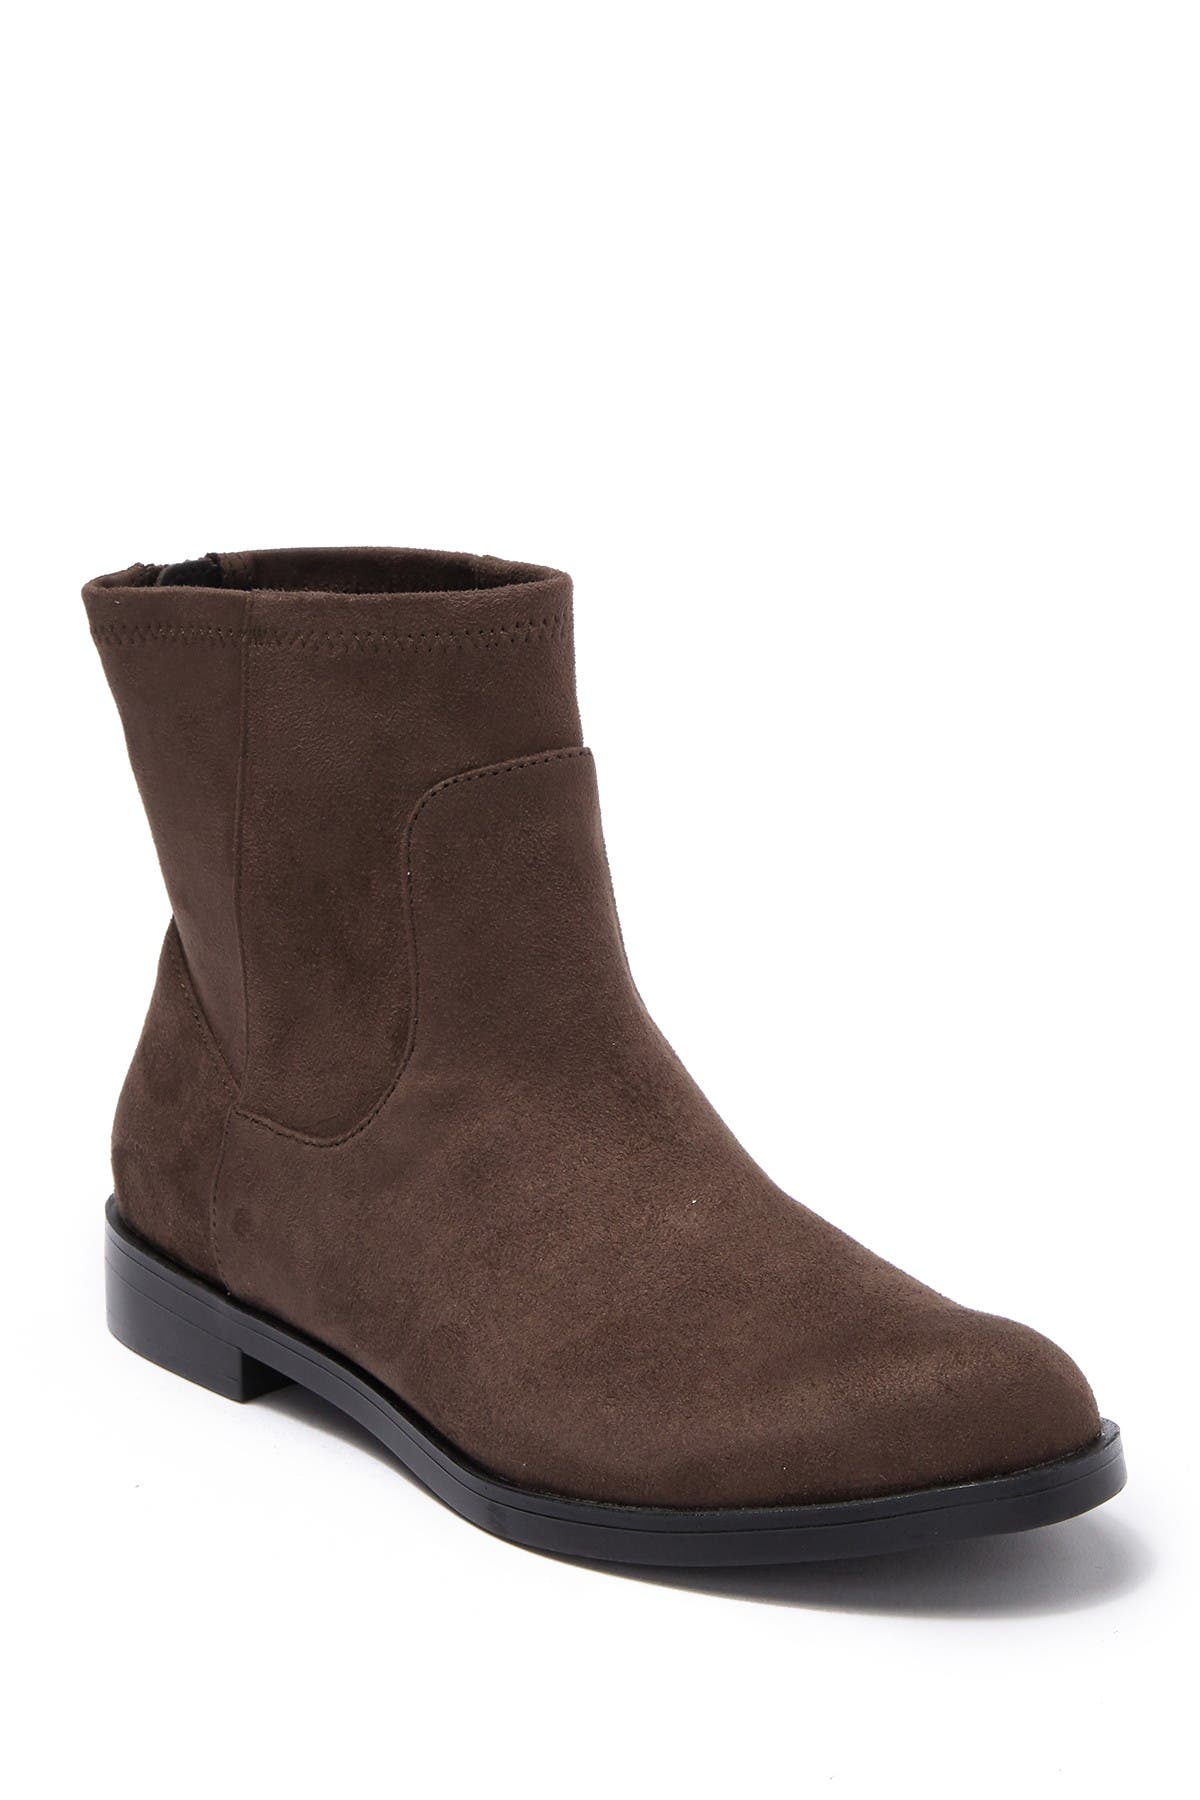 kenneth cole reaction ankle boots